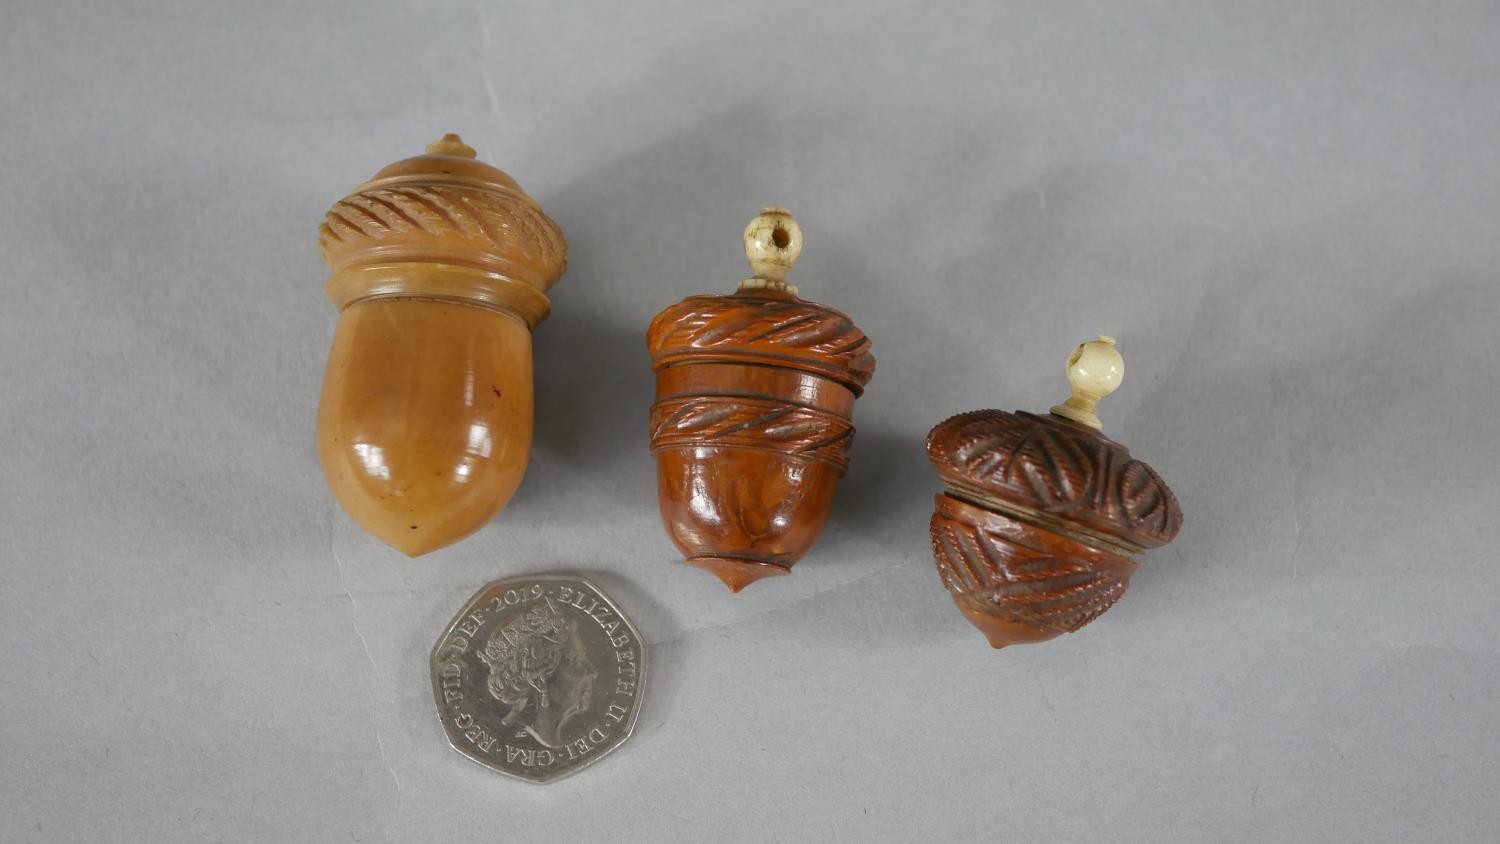 Three 19th century coquilla nut and vegetable ivory acorn design thimble holders. Each with a - Image 6 of 6